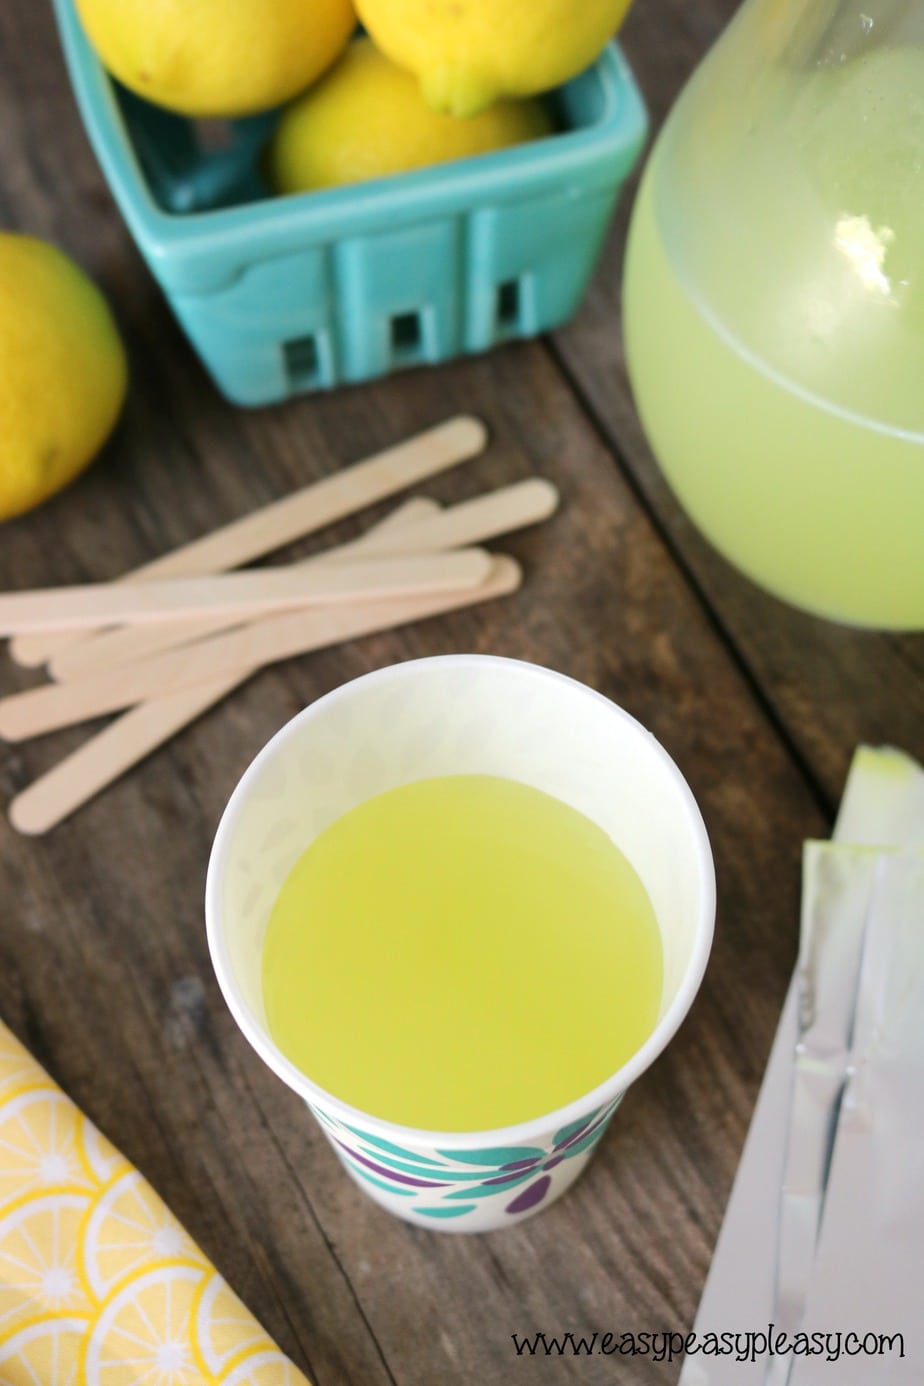 Follow these steps to make super easy and refreshingly delicious homemade lemonade Popsicle. Follow these easy steps to make homemade popsicles in a cup.